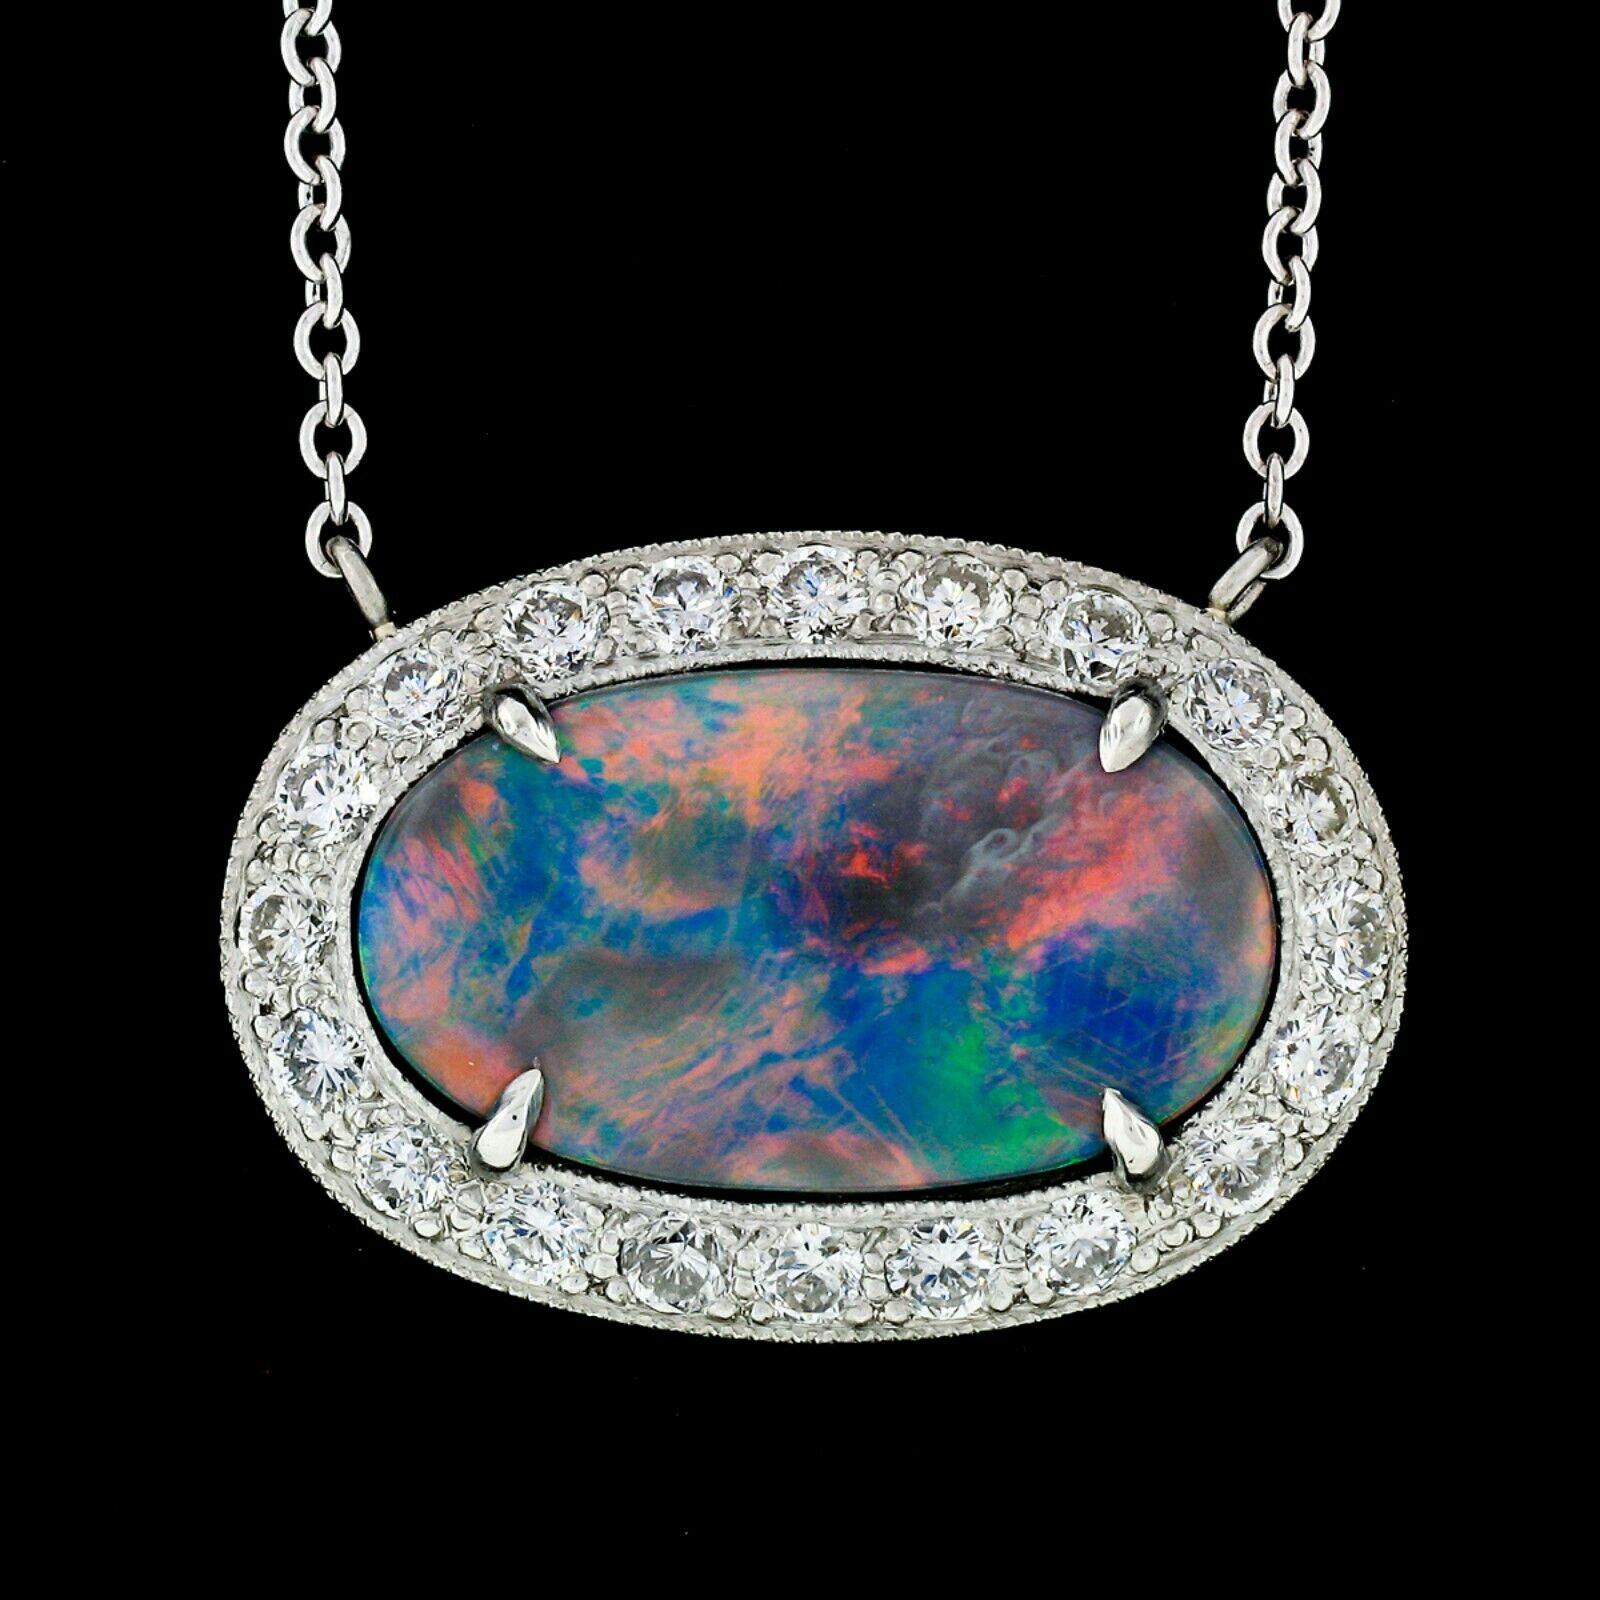 Here we have an absolutely magnificent pendant that has been newly custom made from solid .950 platinum. The pendant features a gorgeous GIA certified gray opal that is 100% natural and weighs exactly 5.19 carats. The oval cut stone has a